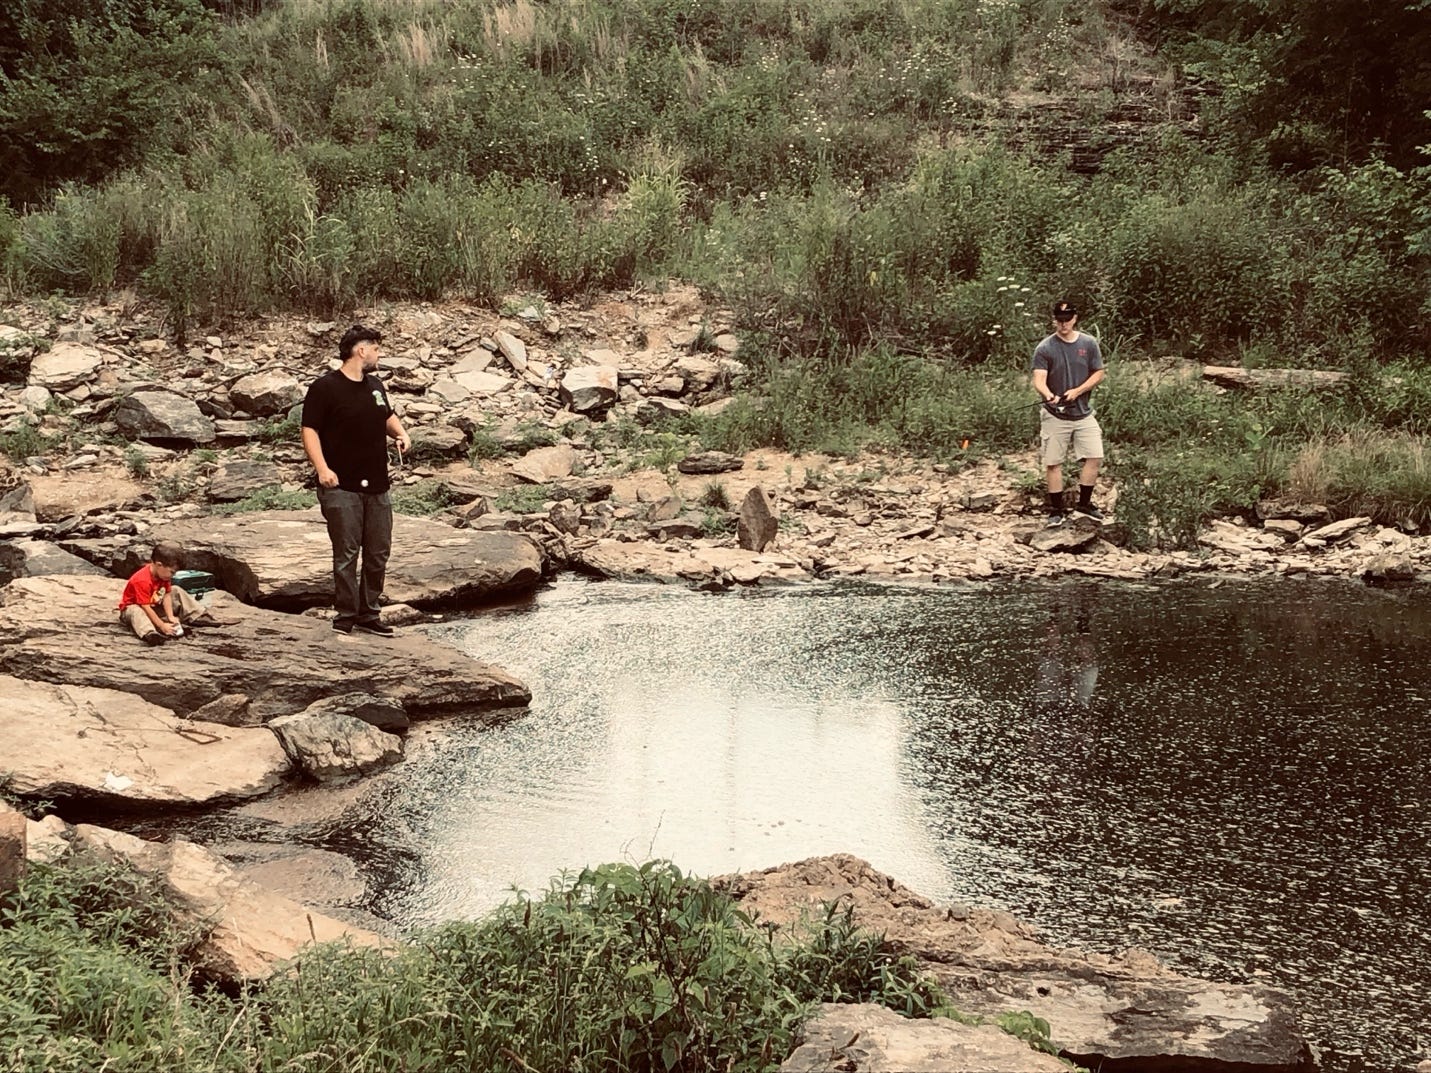 A group of men standing on rocks by a pond

Description automatically generated